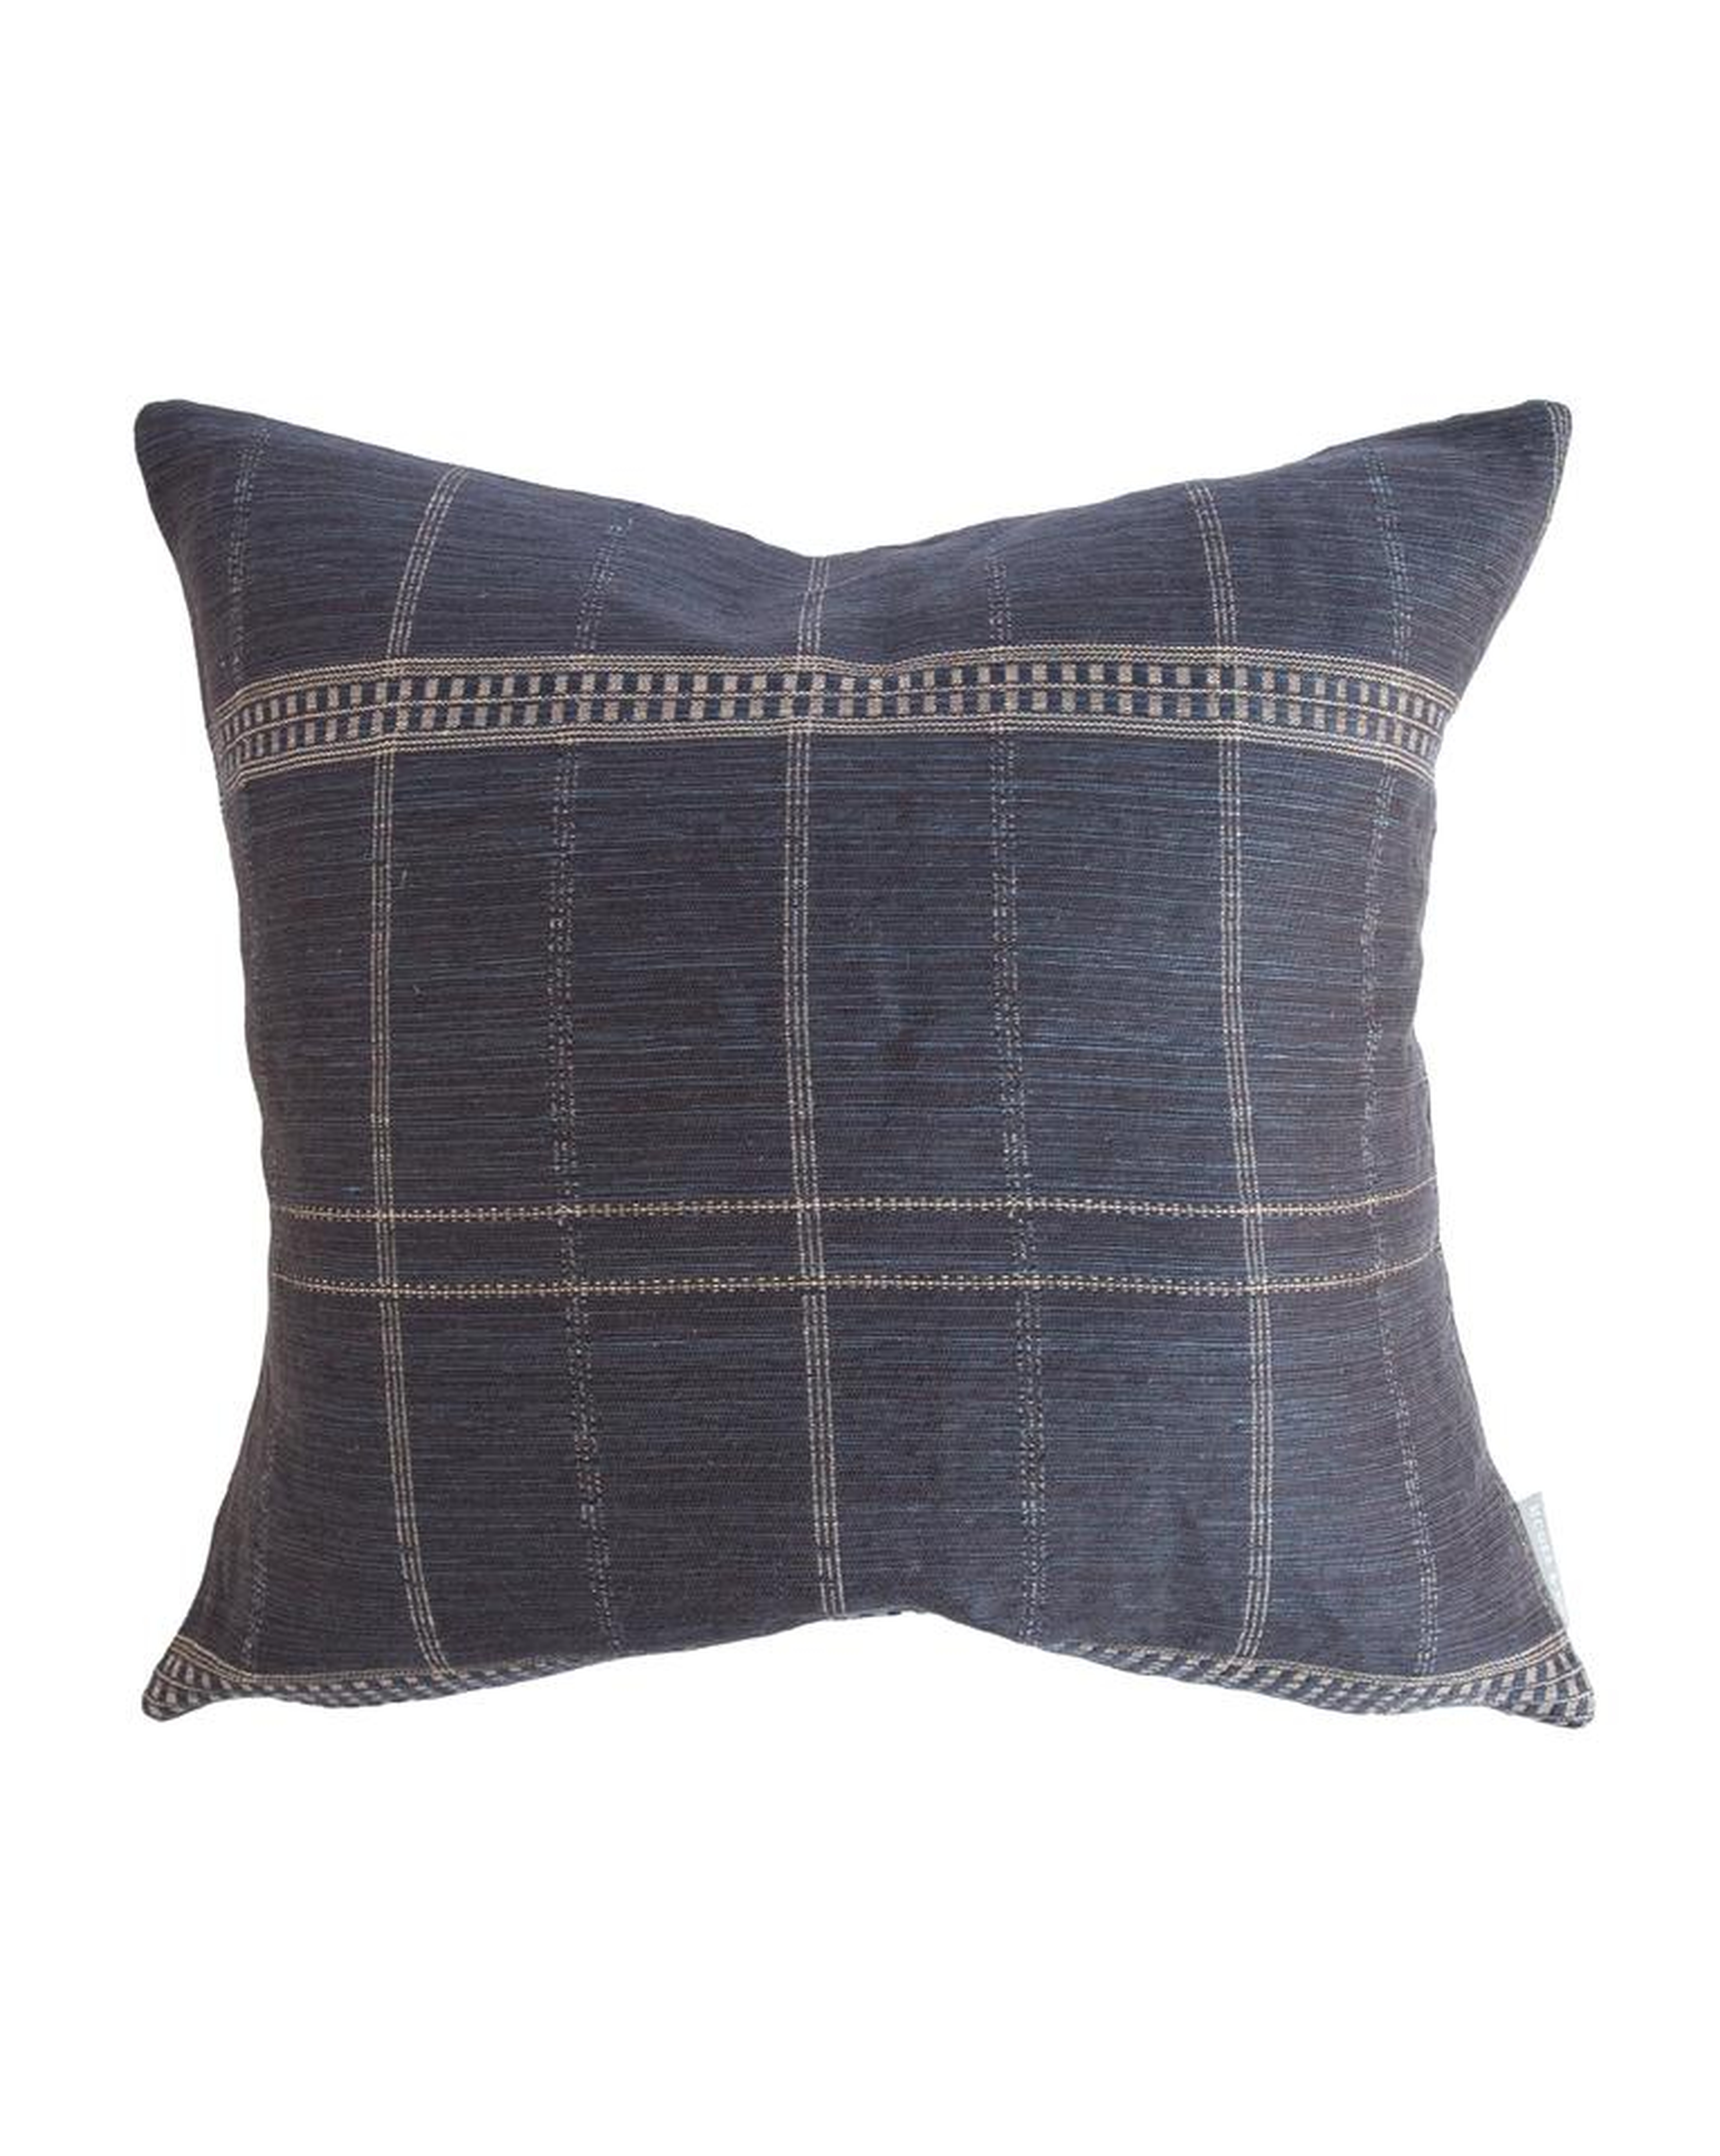 GIBSON PILLOW WITHOUT INSERT, 20" x 20" - McGee & Co.